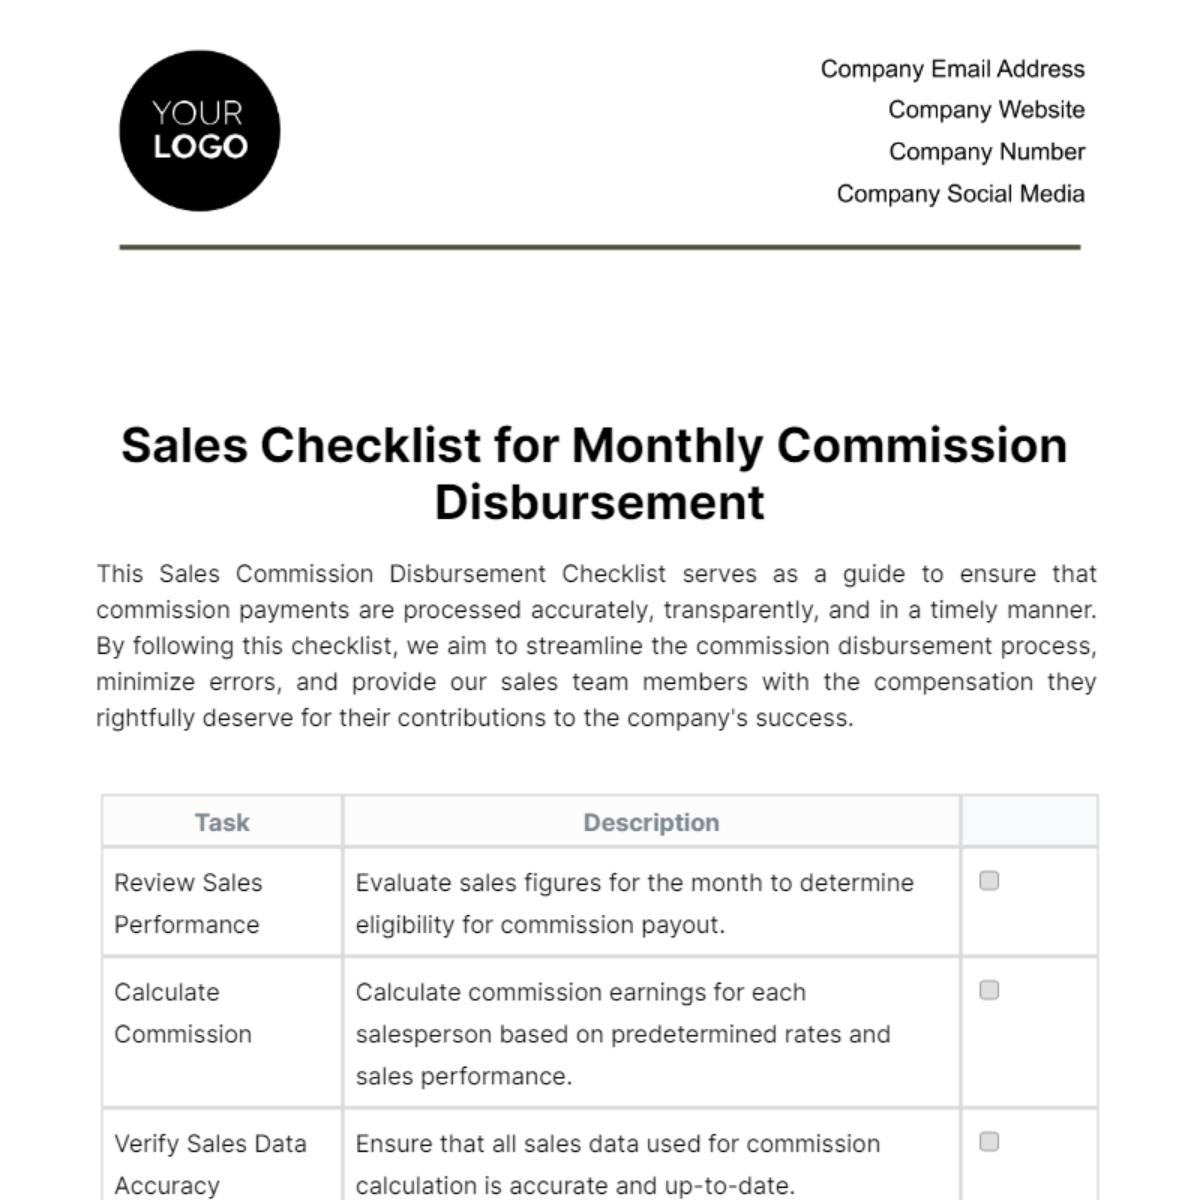 Sales Checklist for Monthly Commission Disbursement Template